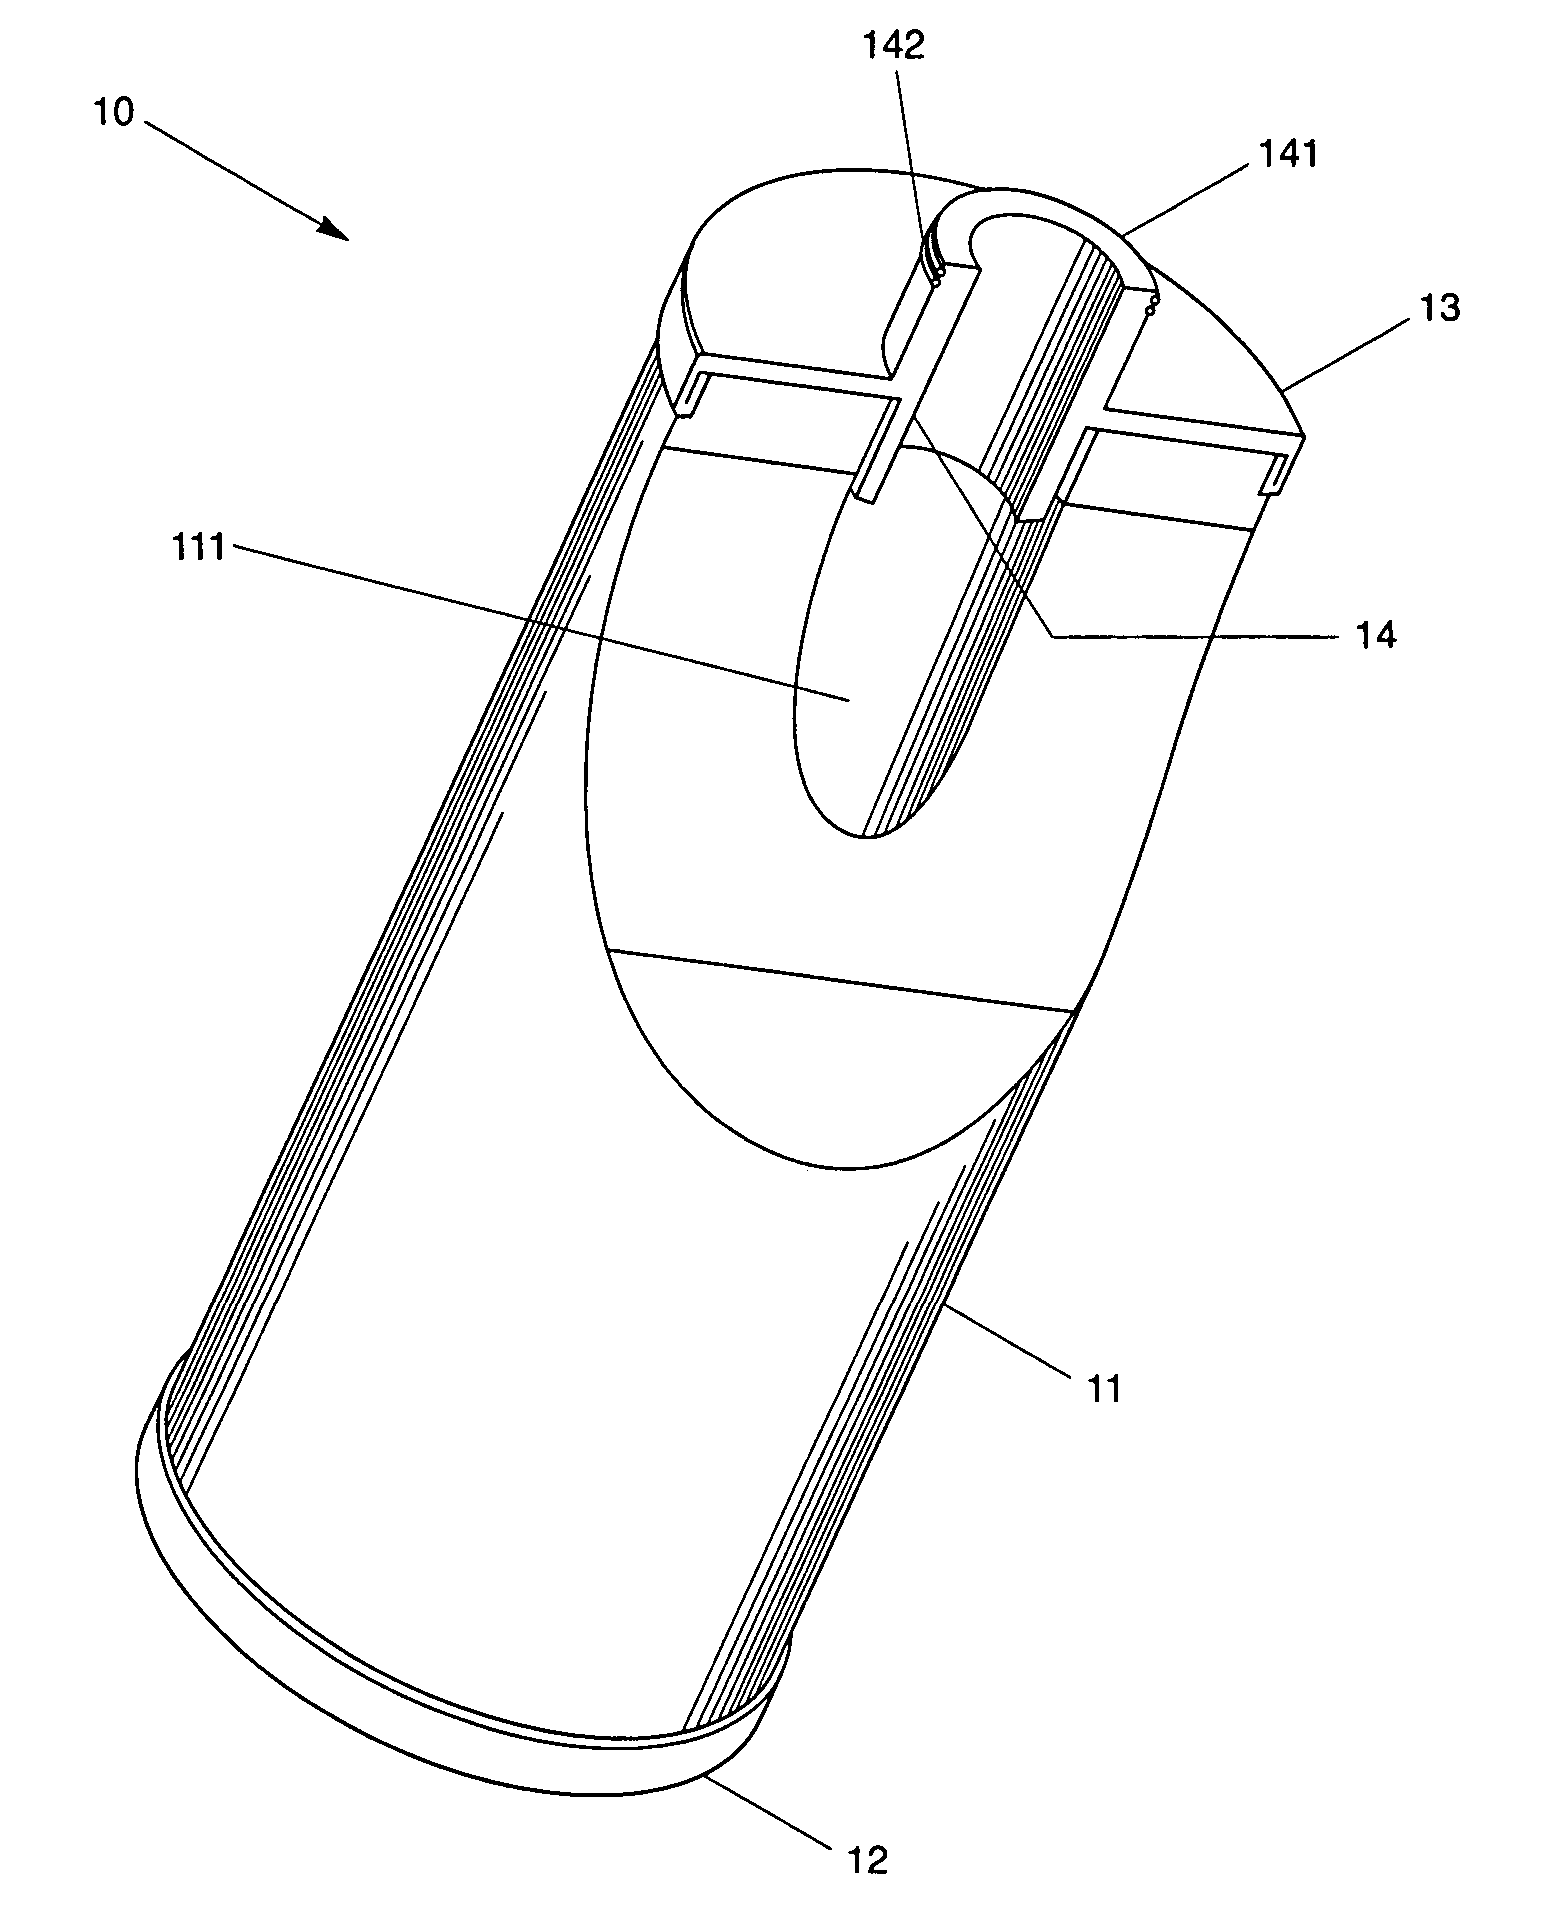 Composite adsorbent block for the treatment of contaminated fluids